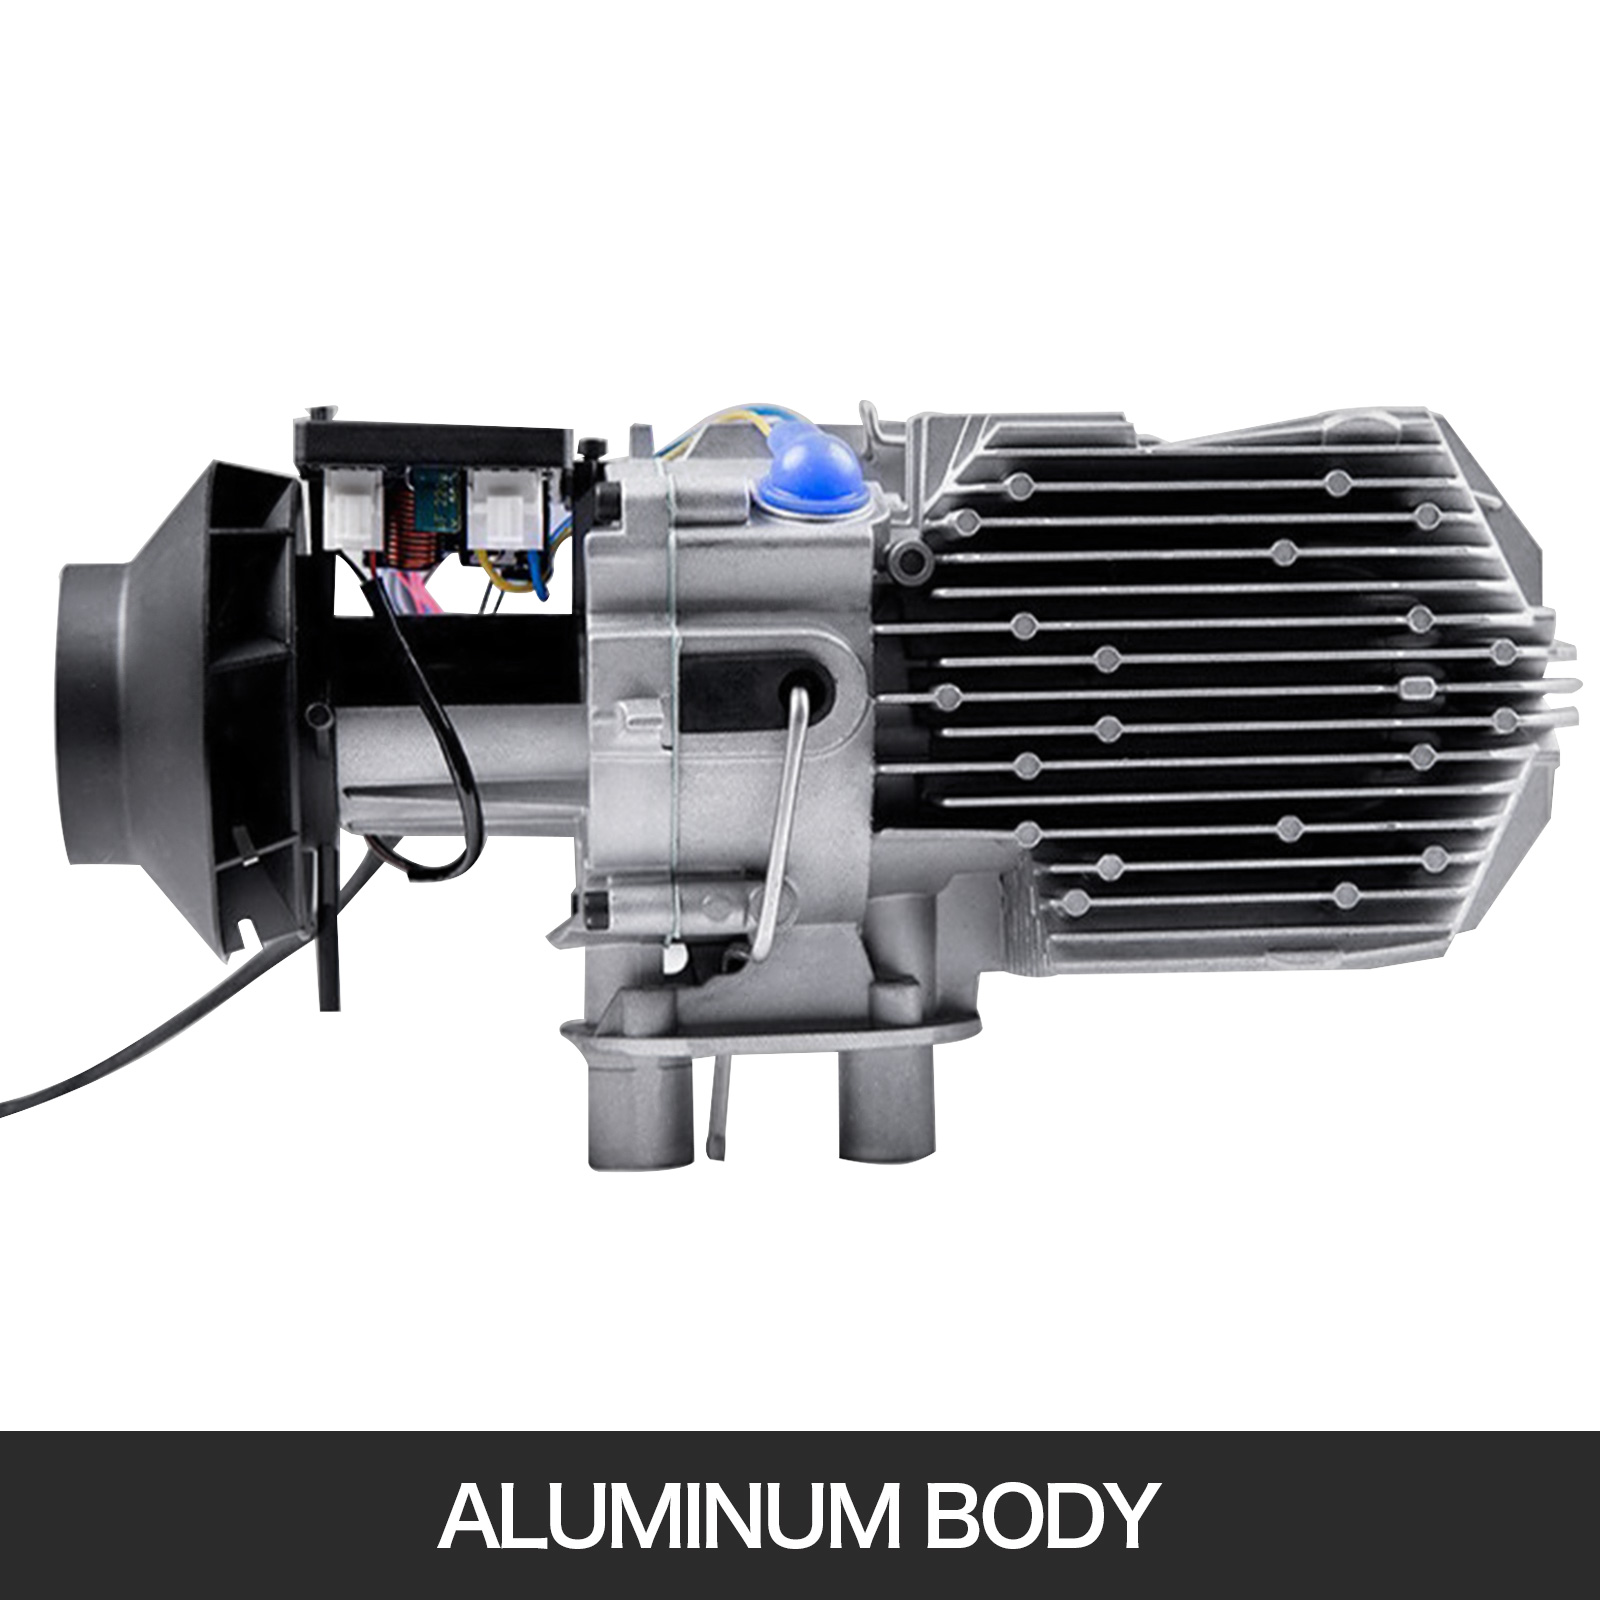 5KW Universal Heater Burner Combustion Chamber For Car Air Diesel